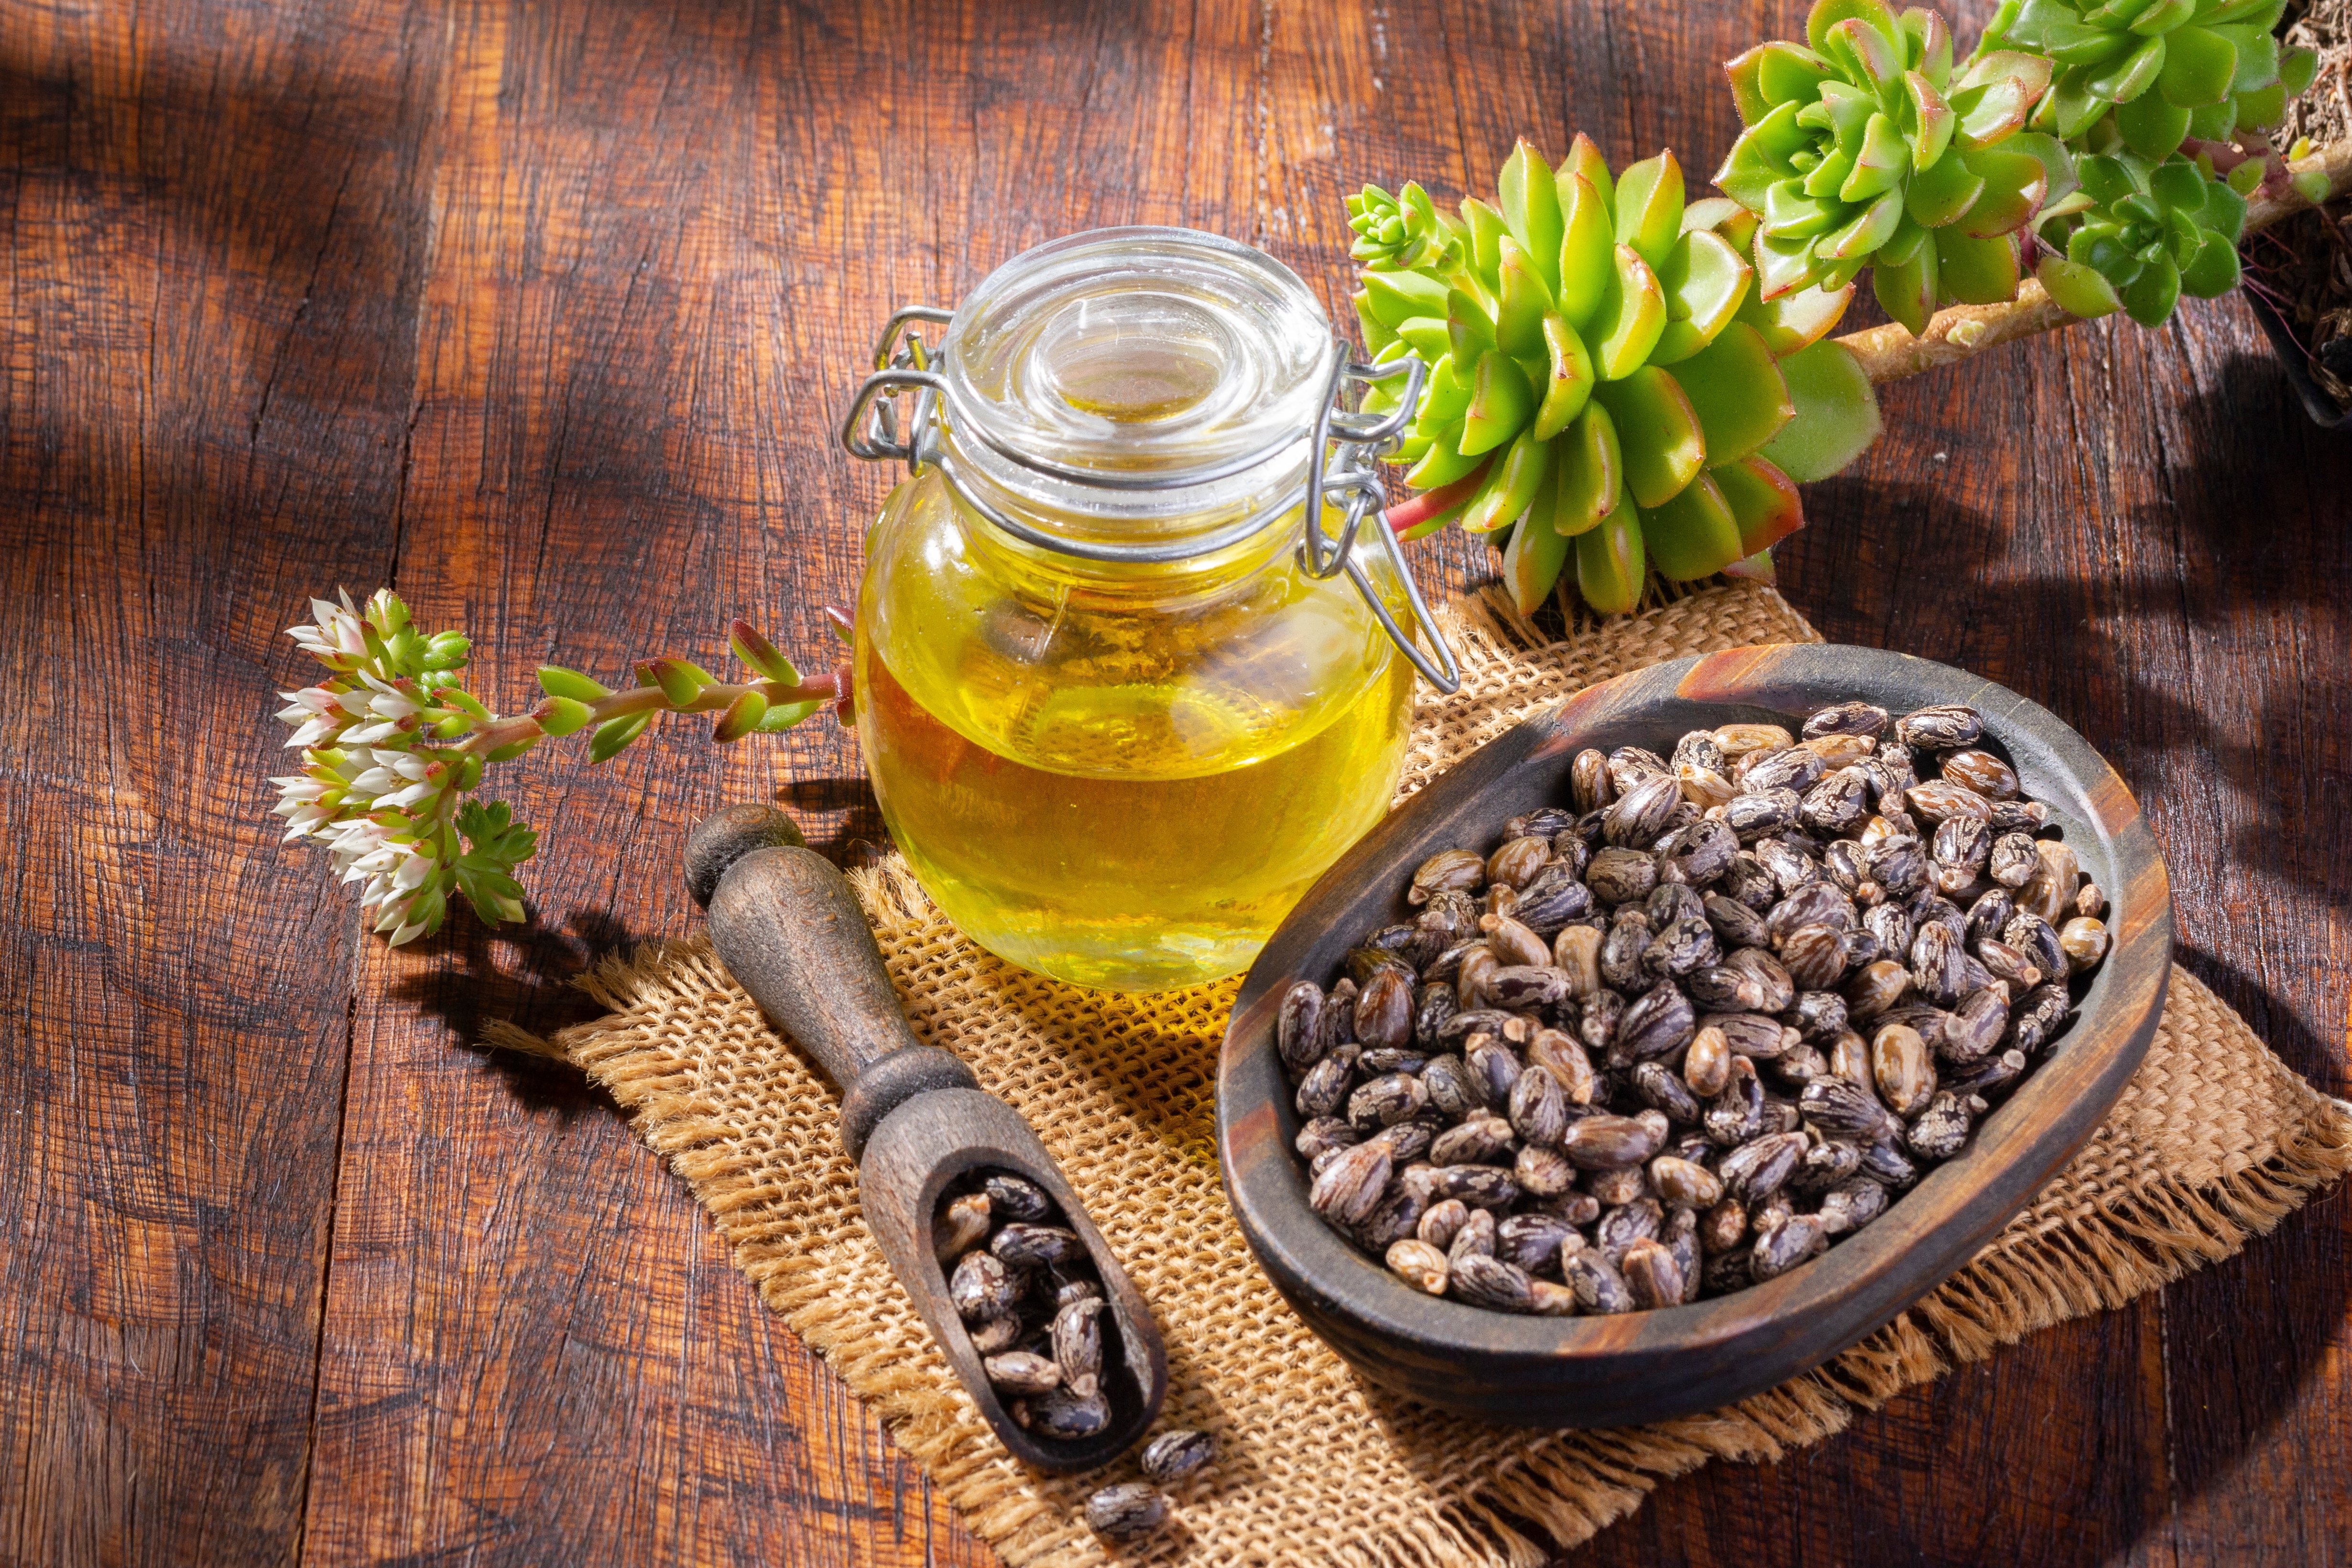 what is castor oil?